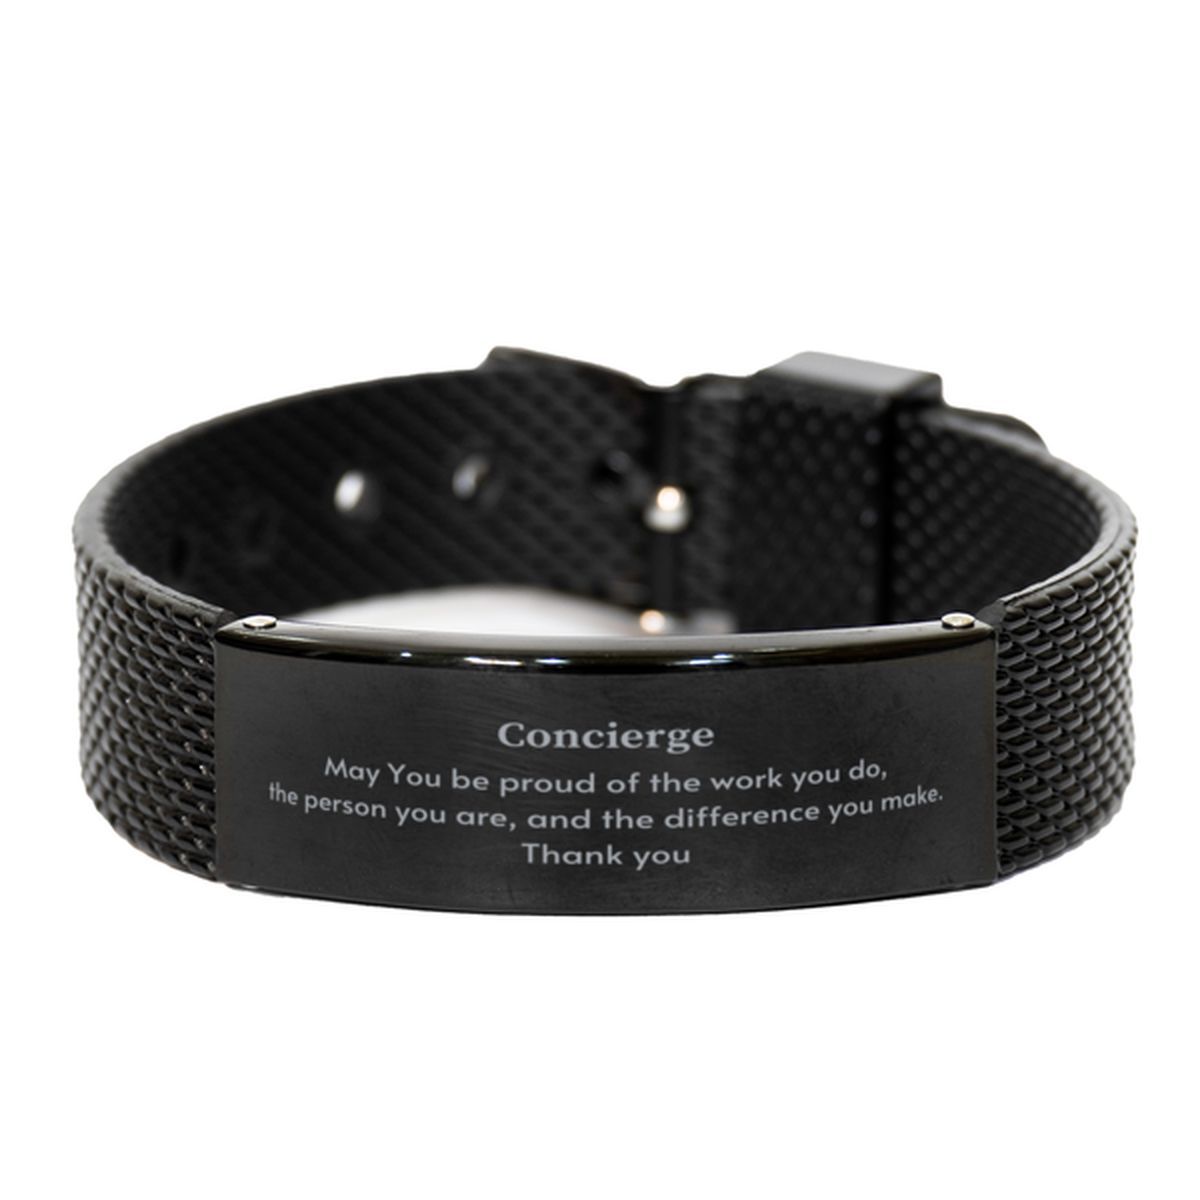 Heartwarming Black Shark Mesh Bracelet Retirement Coworkers Gifts for Concierge, Concierge May You be proud of the work you do, the person you are Gifts for Boss Men Women Friends